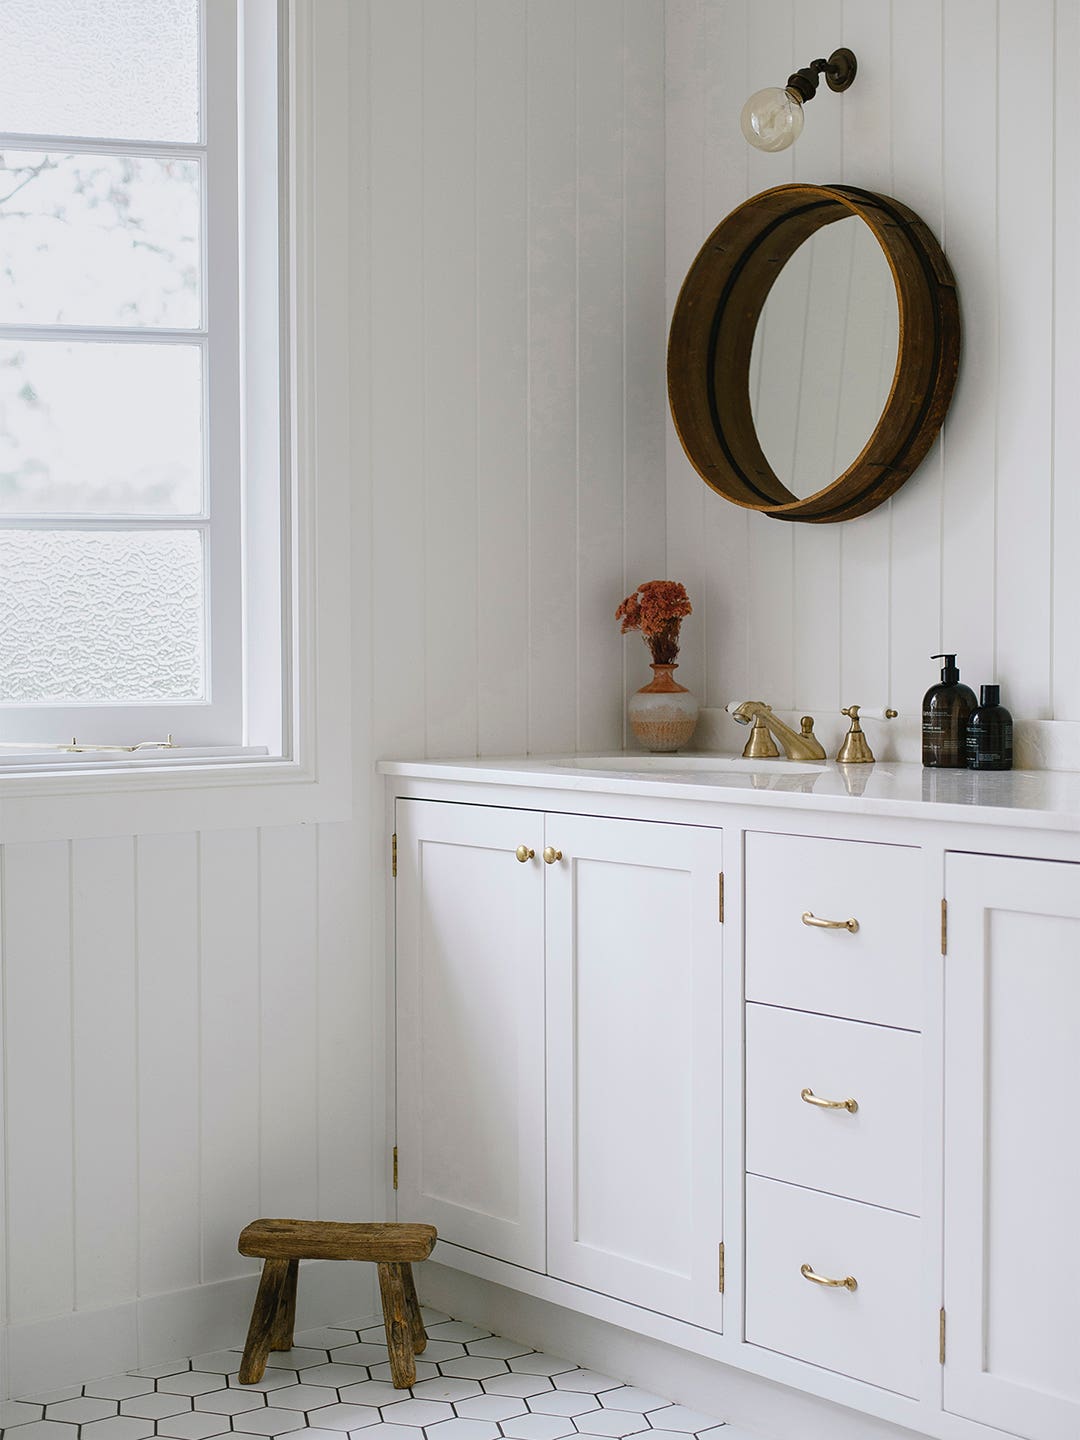 Move Over, White: The Most Popular Bathroom Vanity Finish Is…